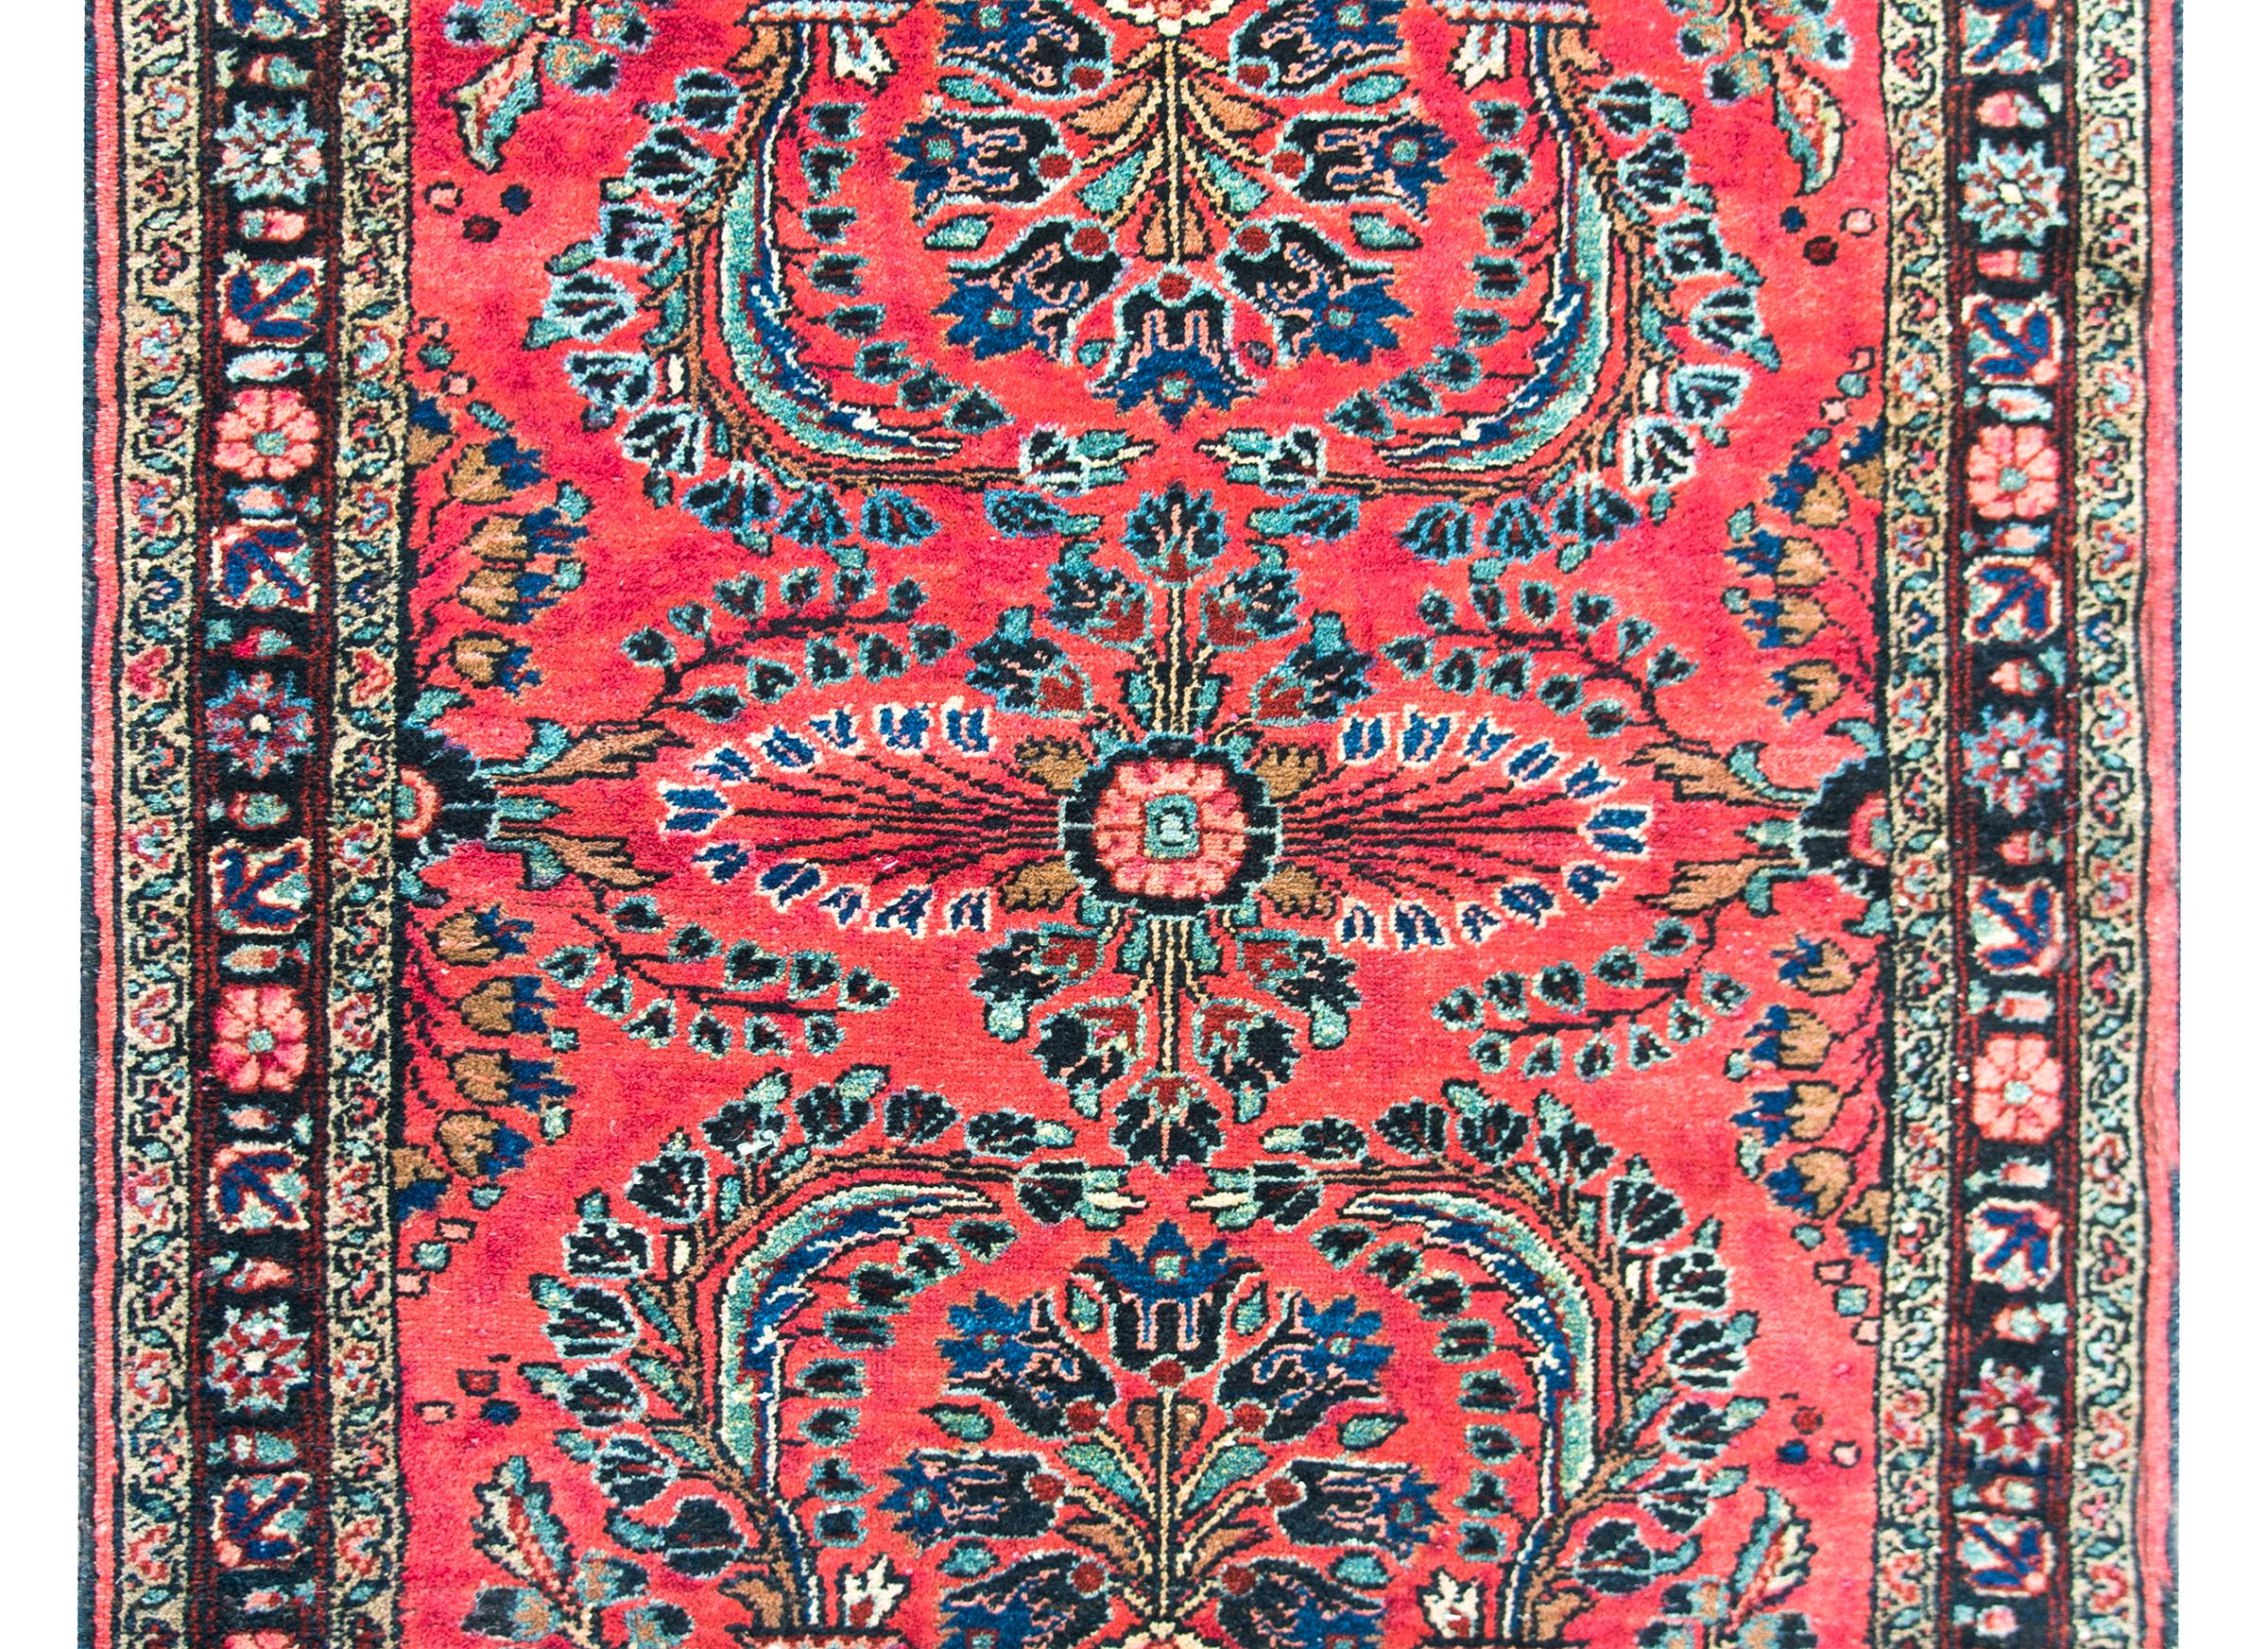 A lovely early 20th century Persian Lilihan rug with a beautiful mirrored floral pattern woven light and dark indigo, pink, brown, white, and black wool, set against a beautiful salmon colored background. The border is sweet, with a central leaf